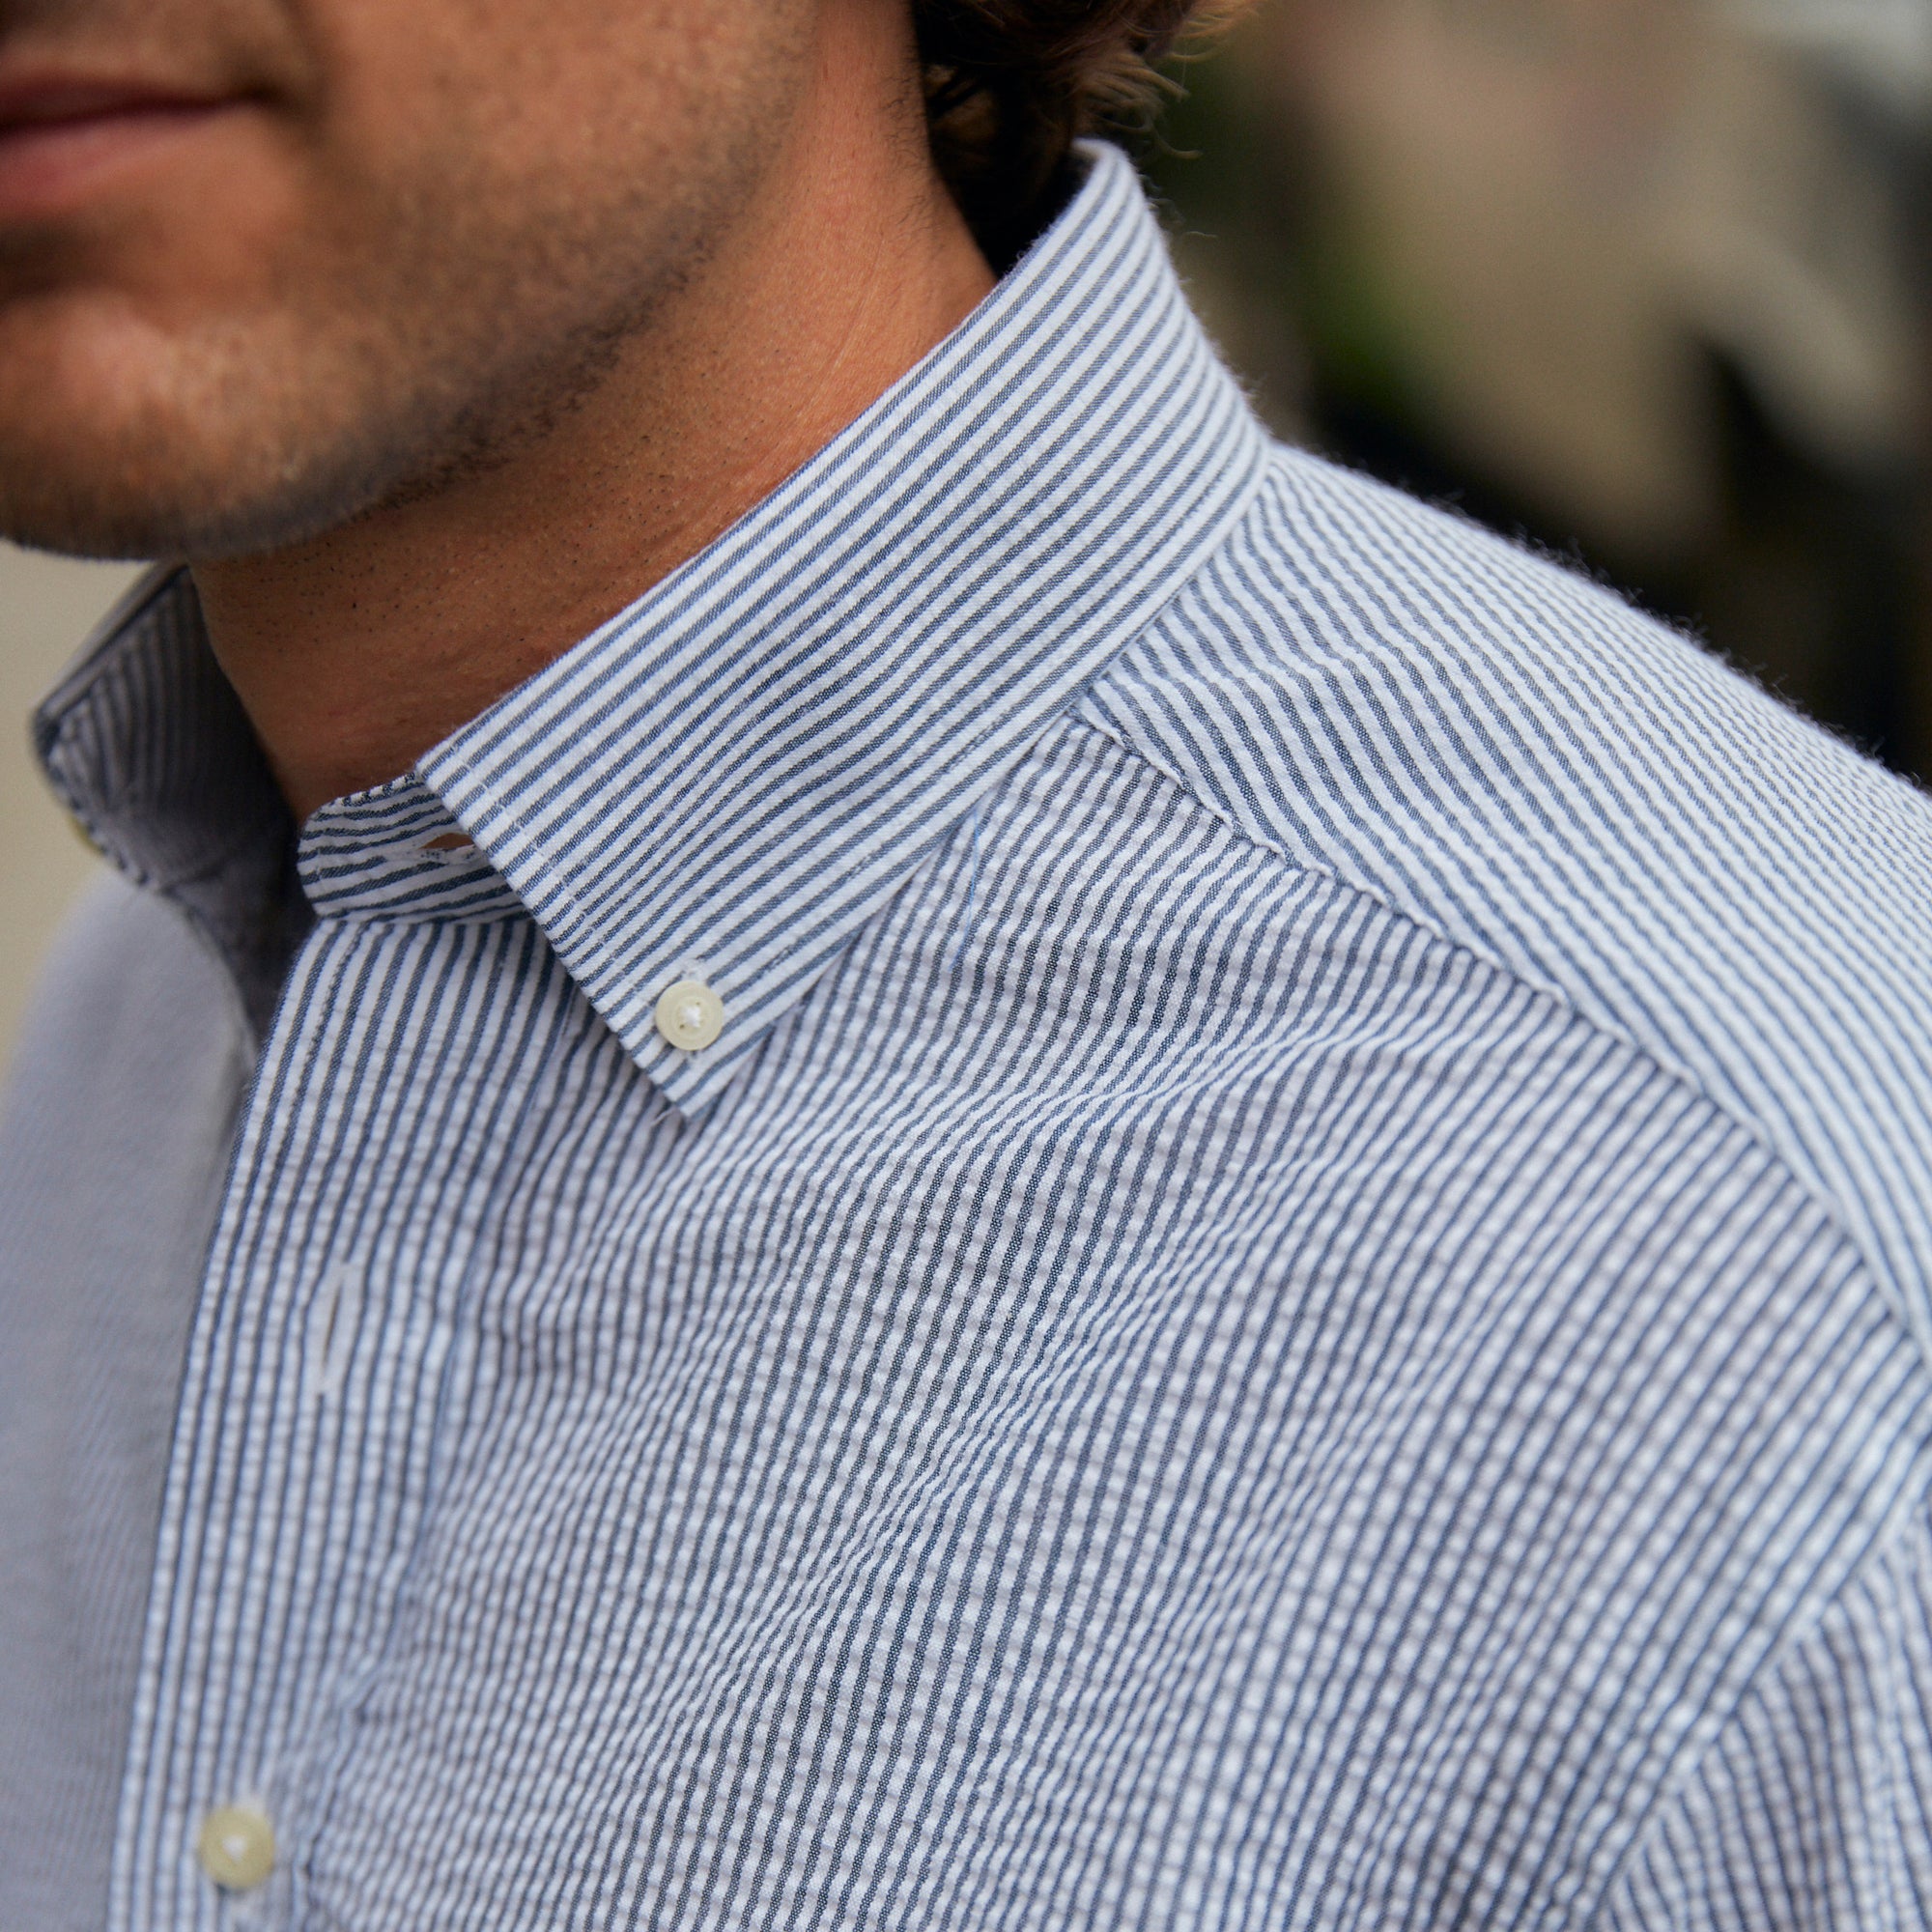 Seersucker all year long in a classic navy & white seersucker shirt. Subtle, lightweight, and a texture they begs a second look.  100% Cotton Seersucker • Button Down Collar • Short Sleeve • Chest Pocket • Machine Washable • Imported